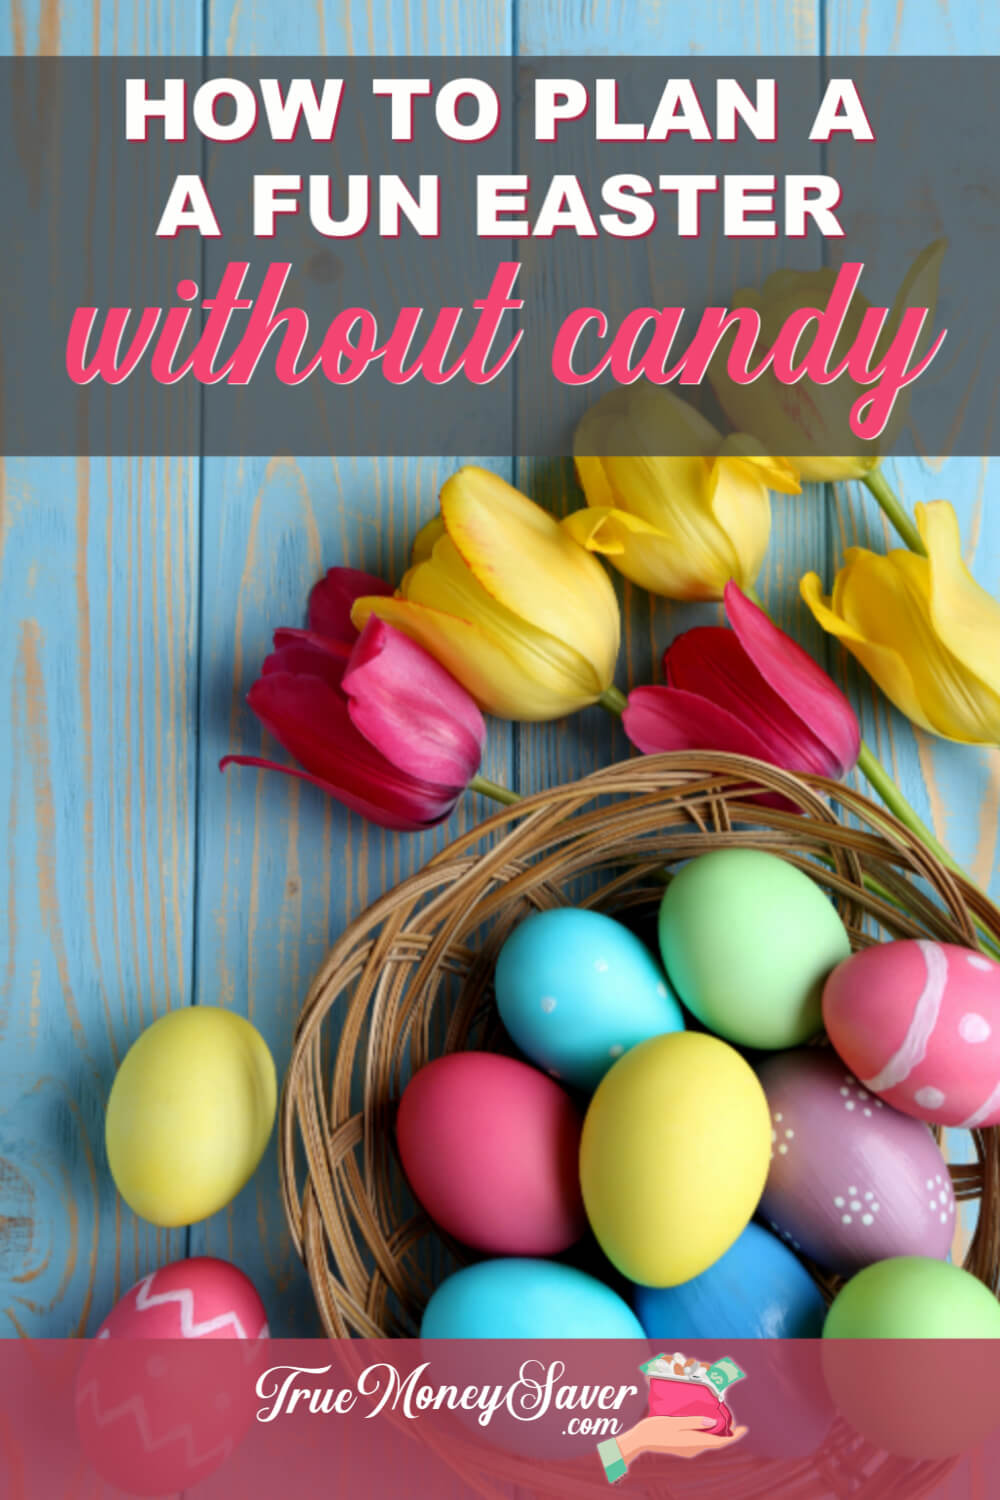 How To Plan A Fun Easter Without Candy